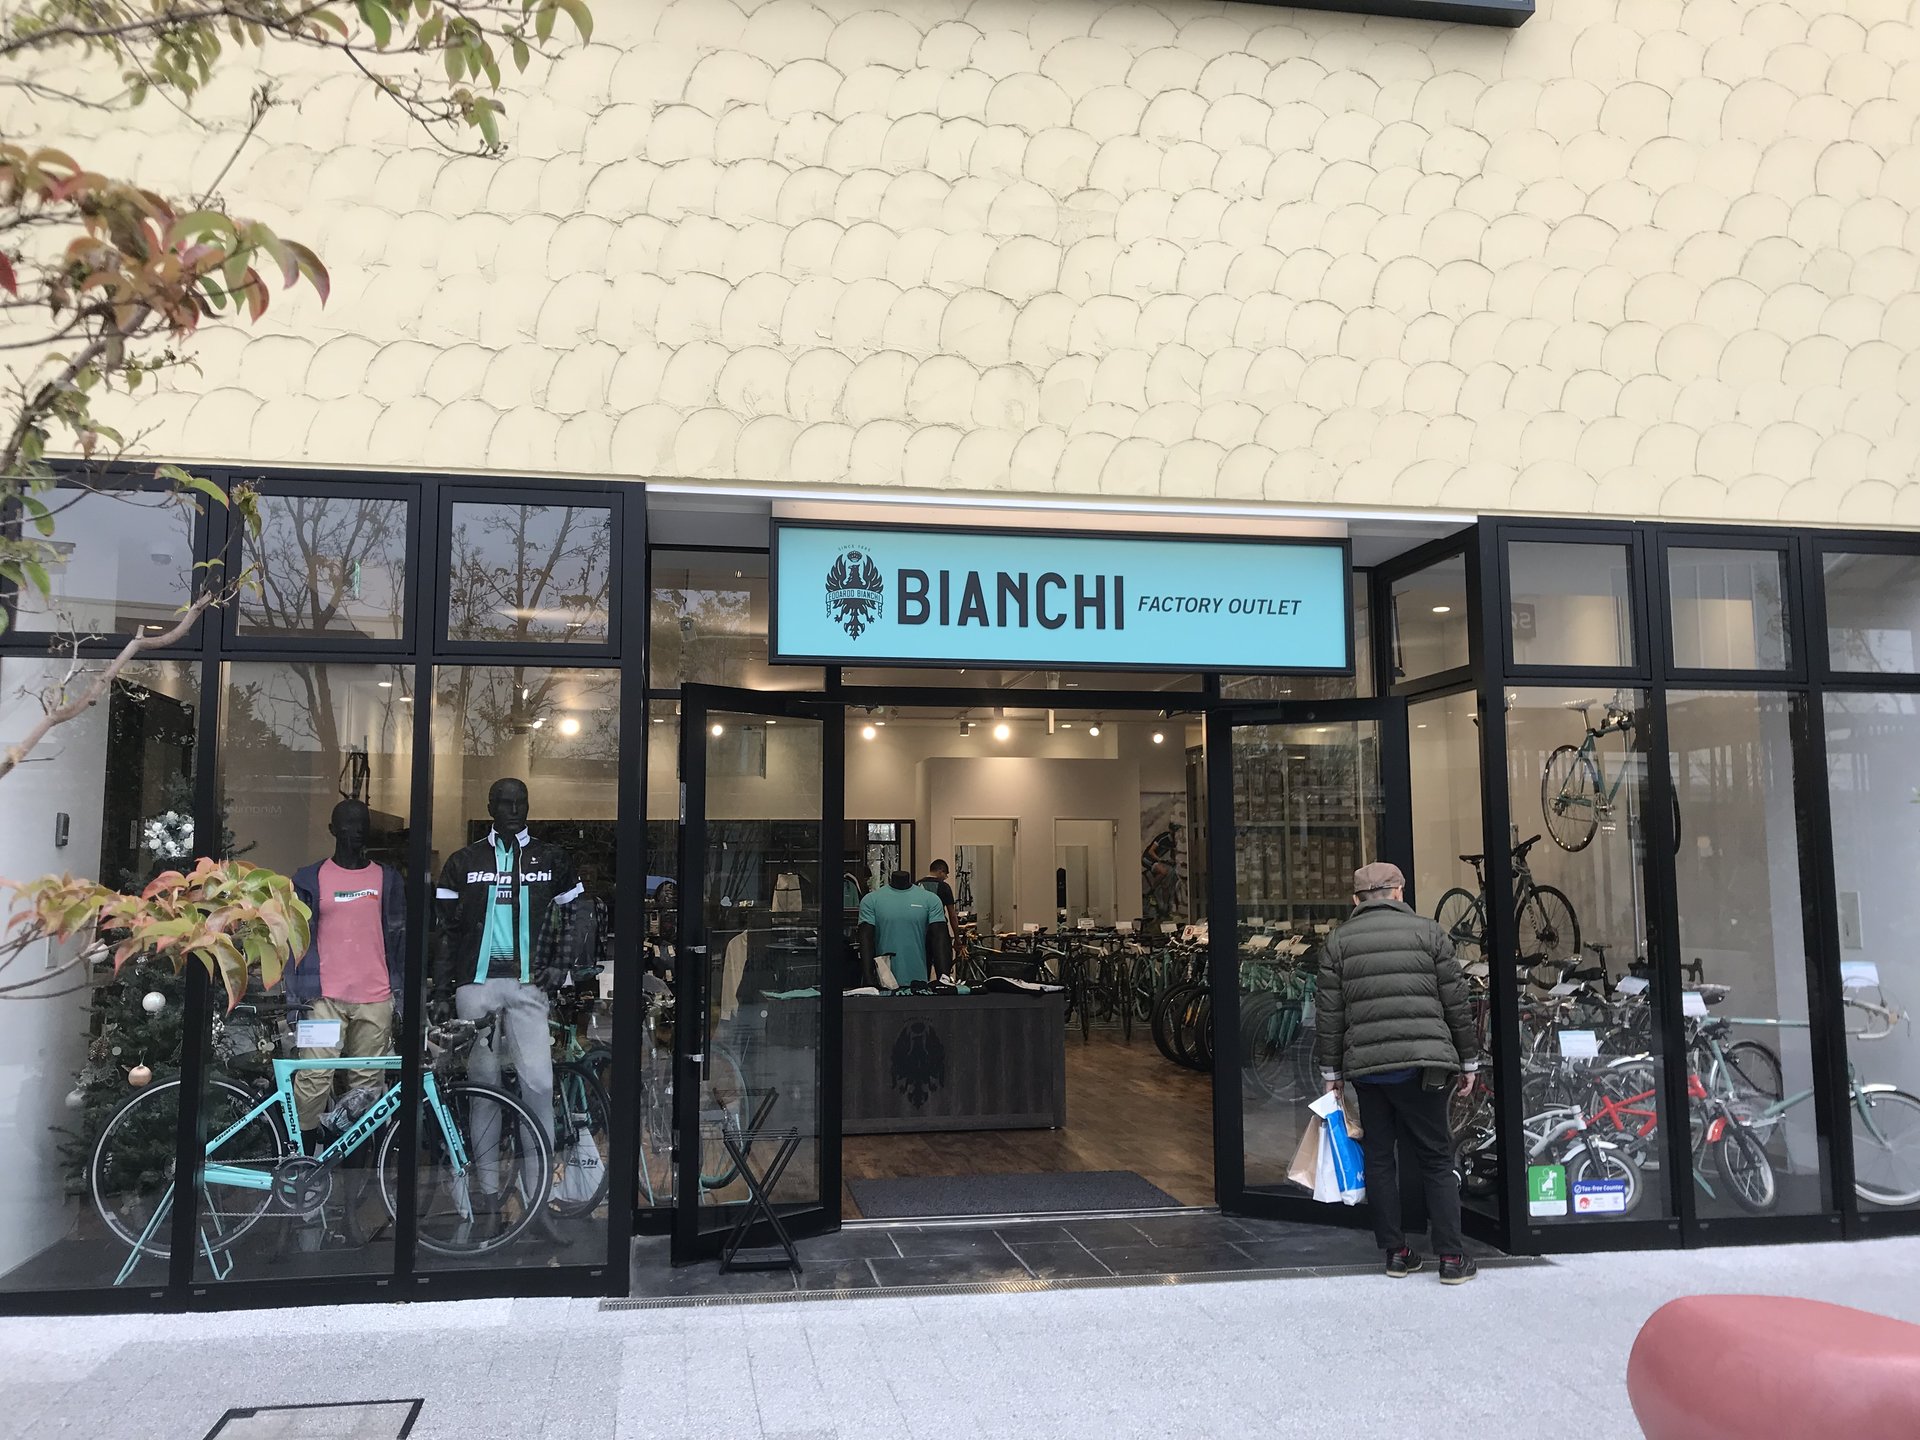 BIANCHI FACTORY OUTLET